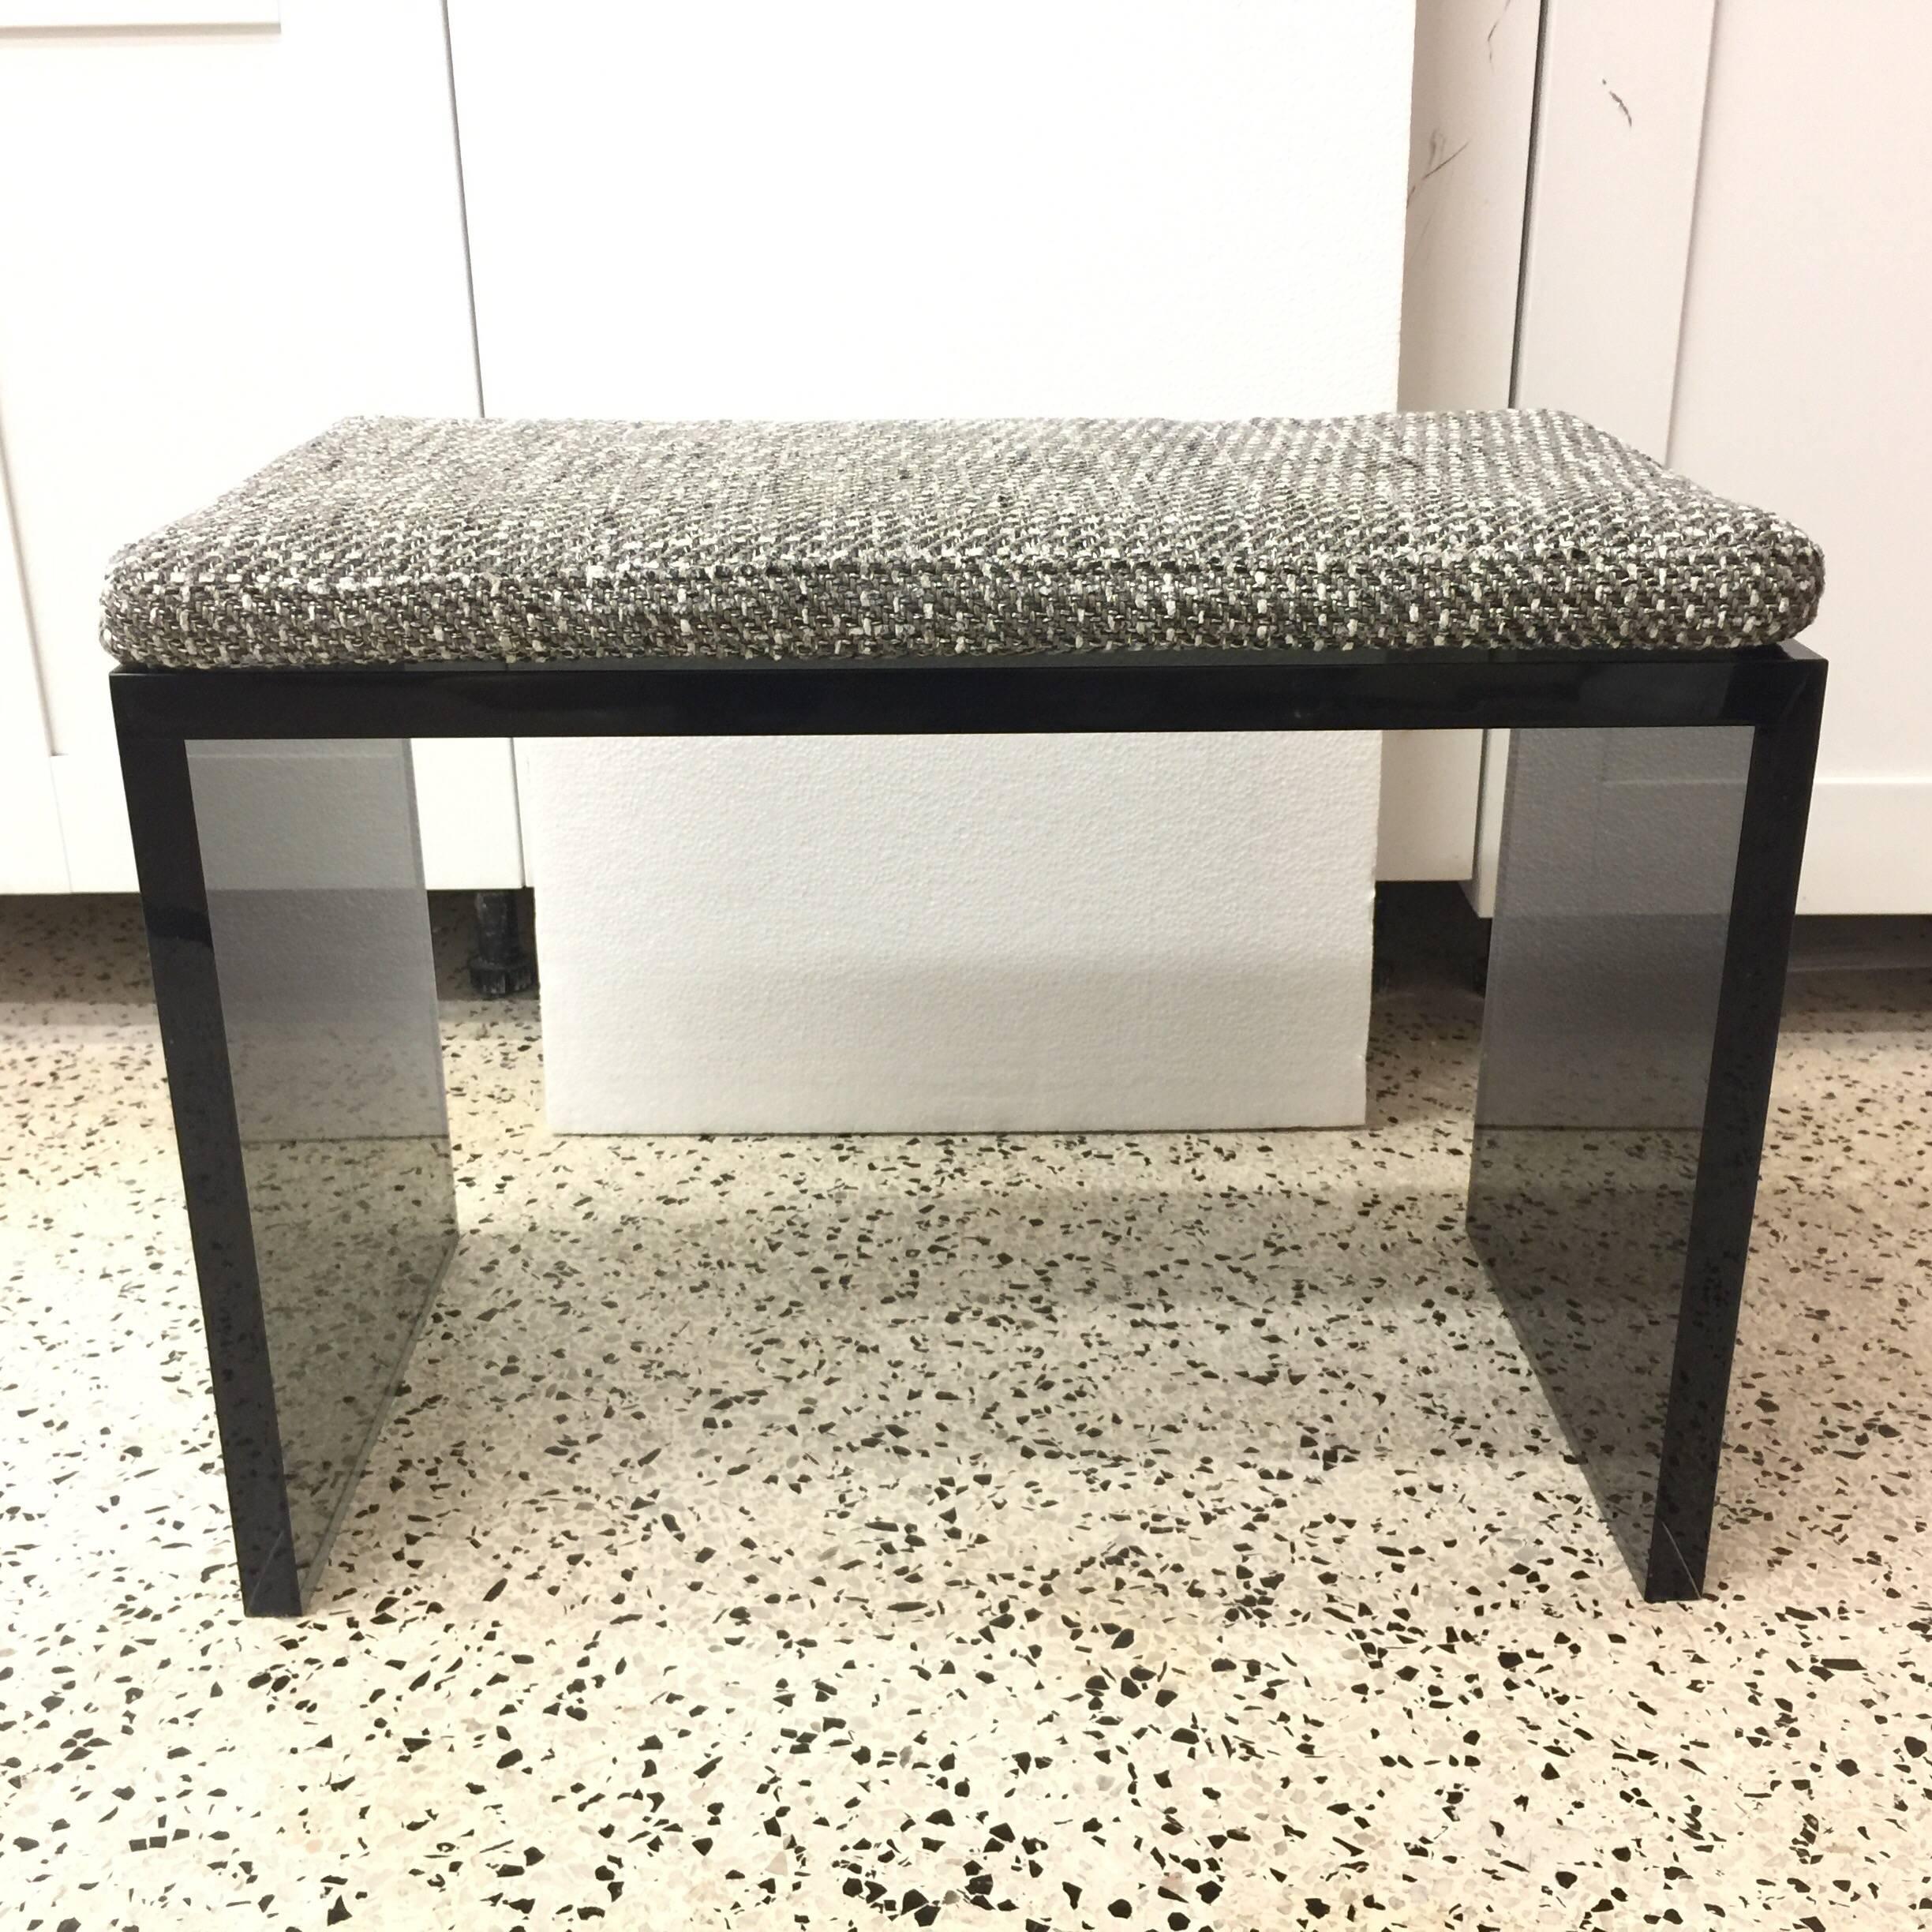 Topped with a Chanel style woven wool fabric and attached with Velcro, these Judd style custom designed smoked grey Lucite benches are perfect for use together or separately. Priced and sold individually.